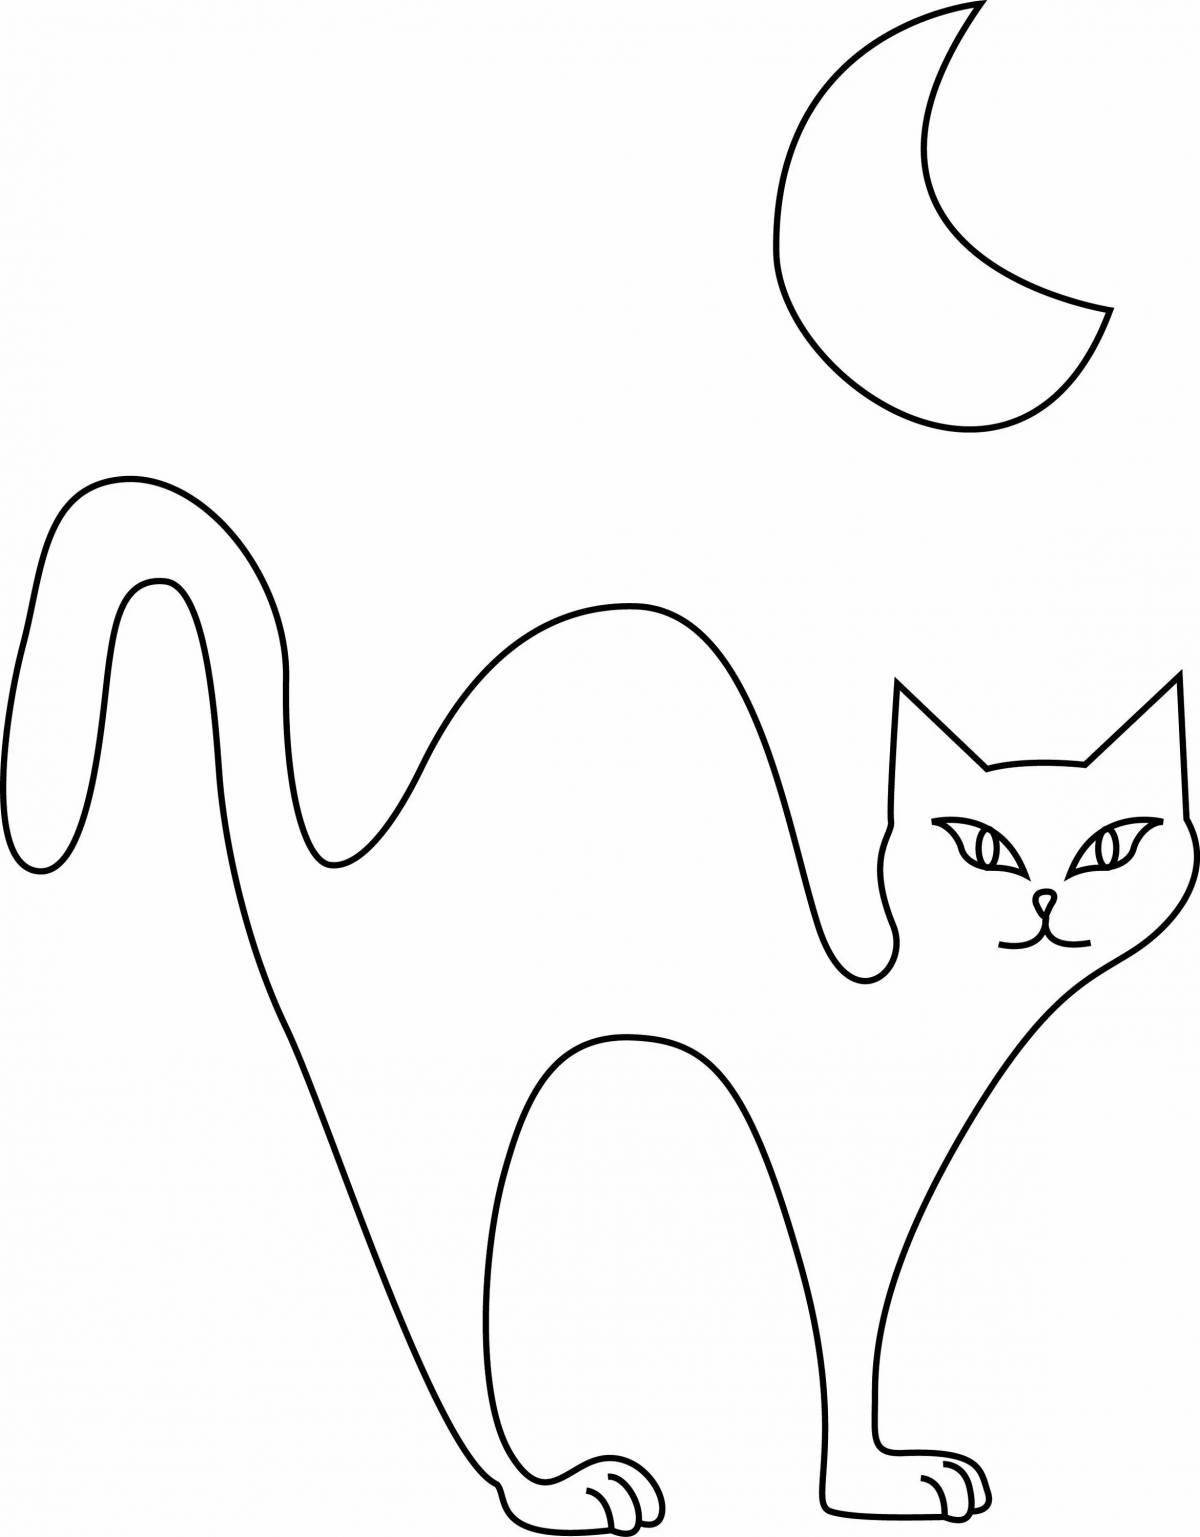 Coloring book bright silhouette of a cat